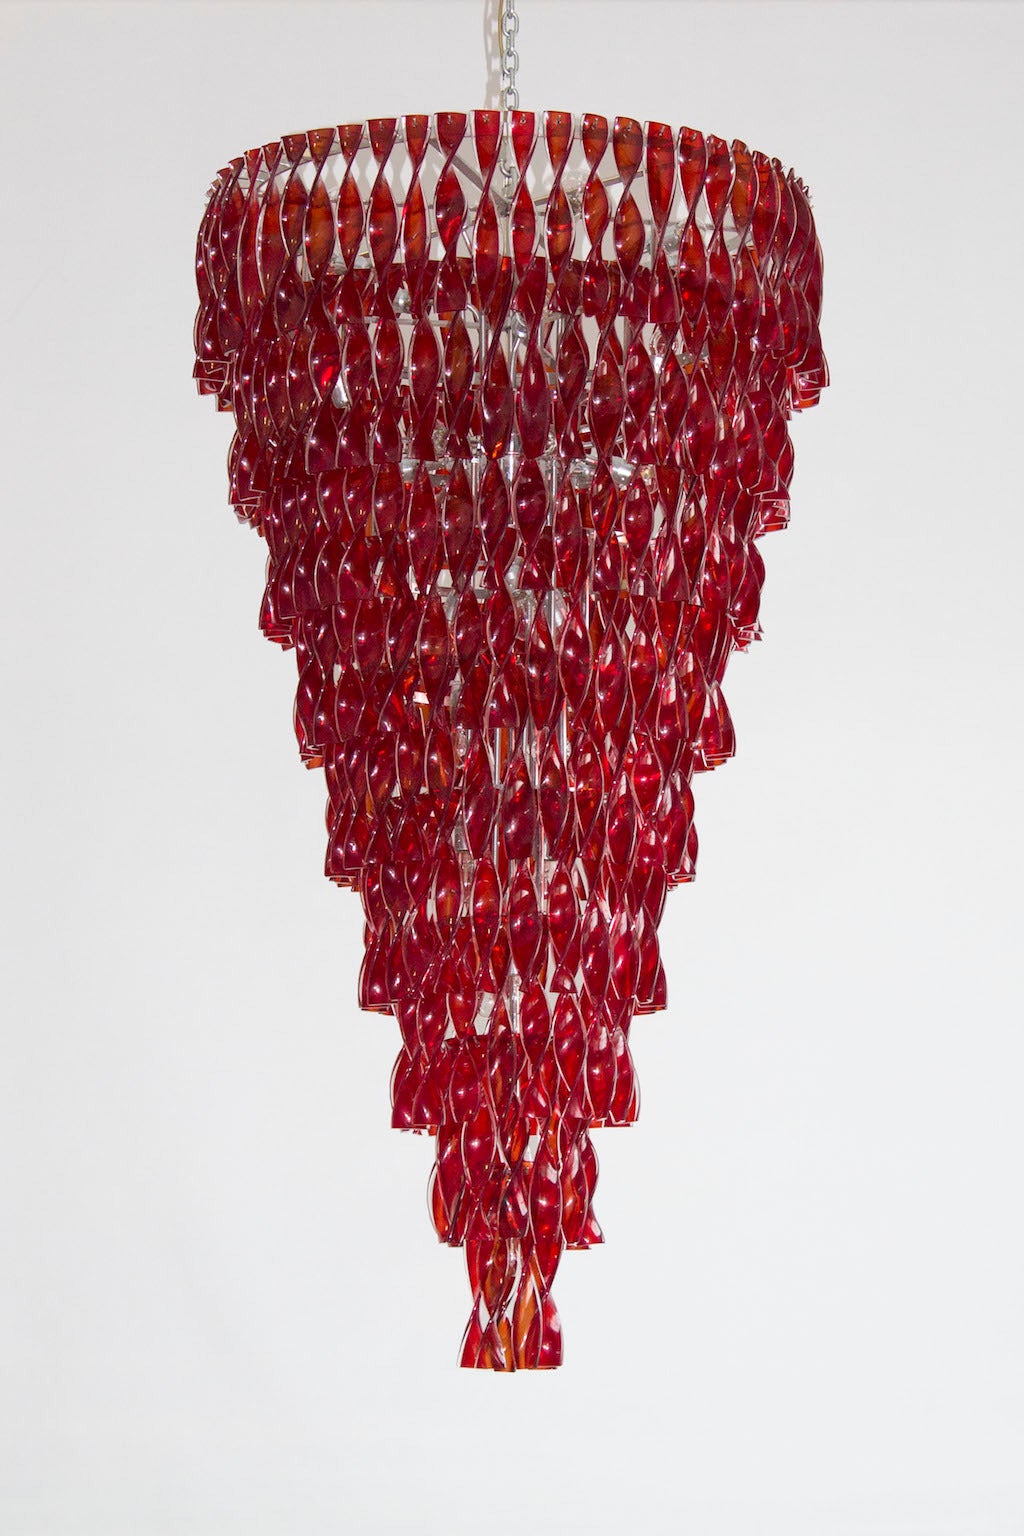 Beautiful red chandeliers in excellent original condition, composed by glass elements in red color in twisted form, with a chrome frame, circa 1970s. The chandelier is 71 inches high, by 40 inches diameter and having 32 lights.

We can